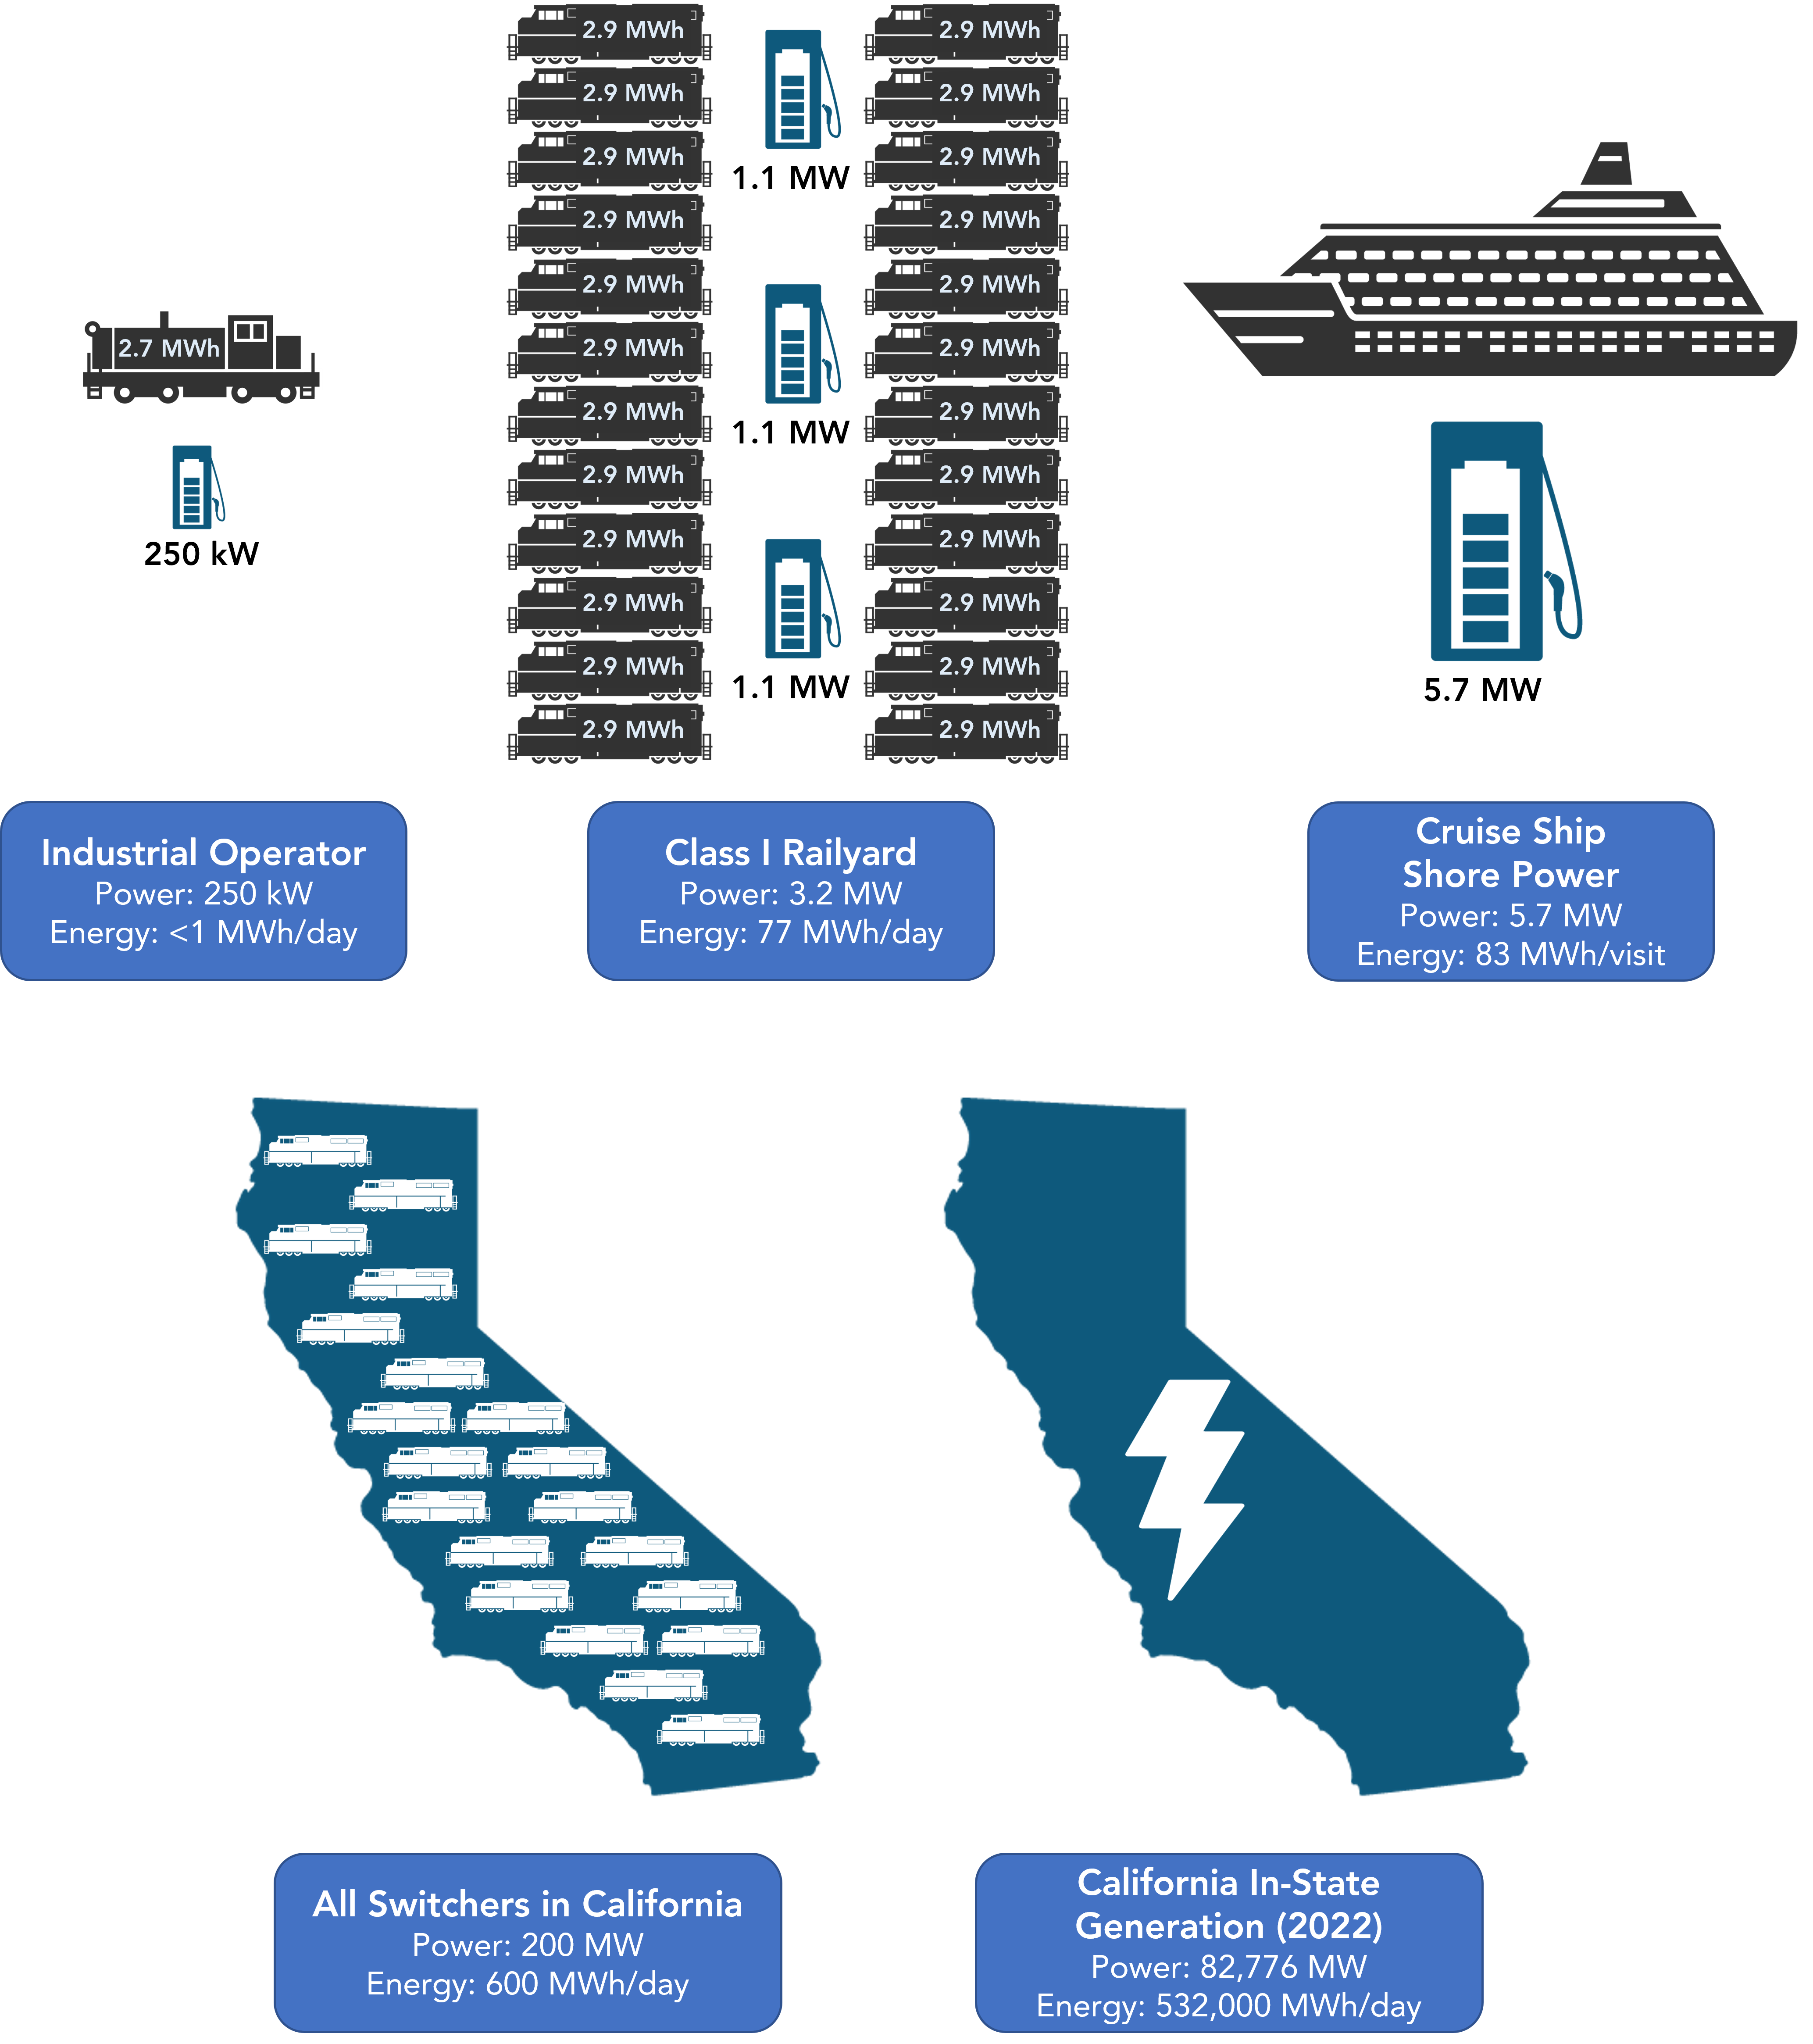 Graphic showing the charging infrastructure needs for industrial locomotives, Class 1 locomotives, all California switchers, visiting cruise ships, and all users statewide